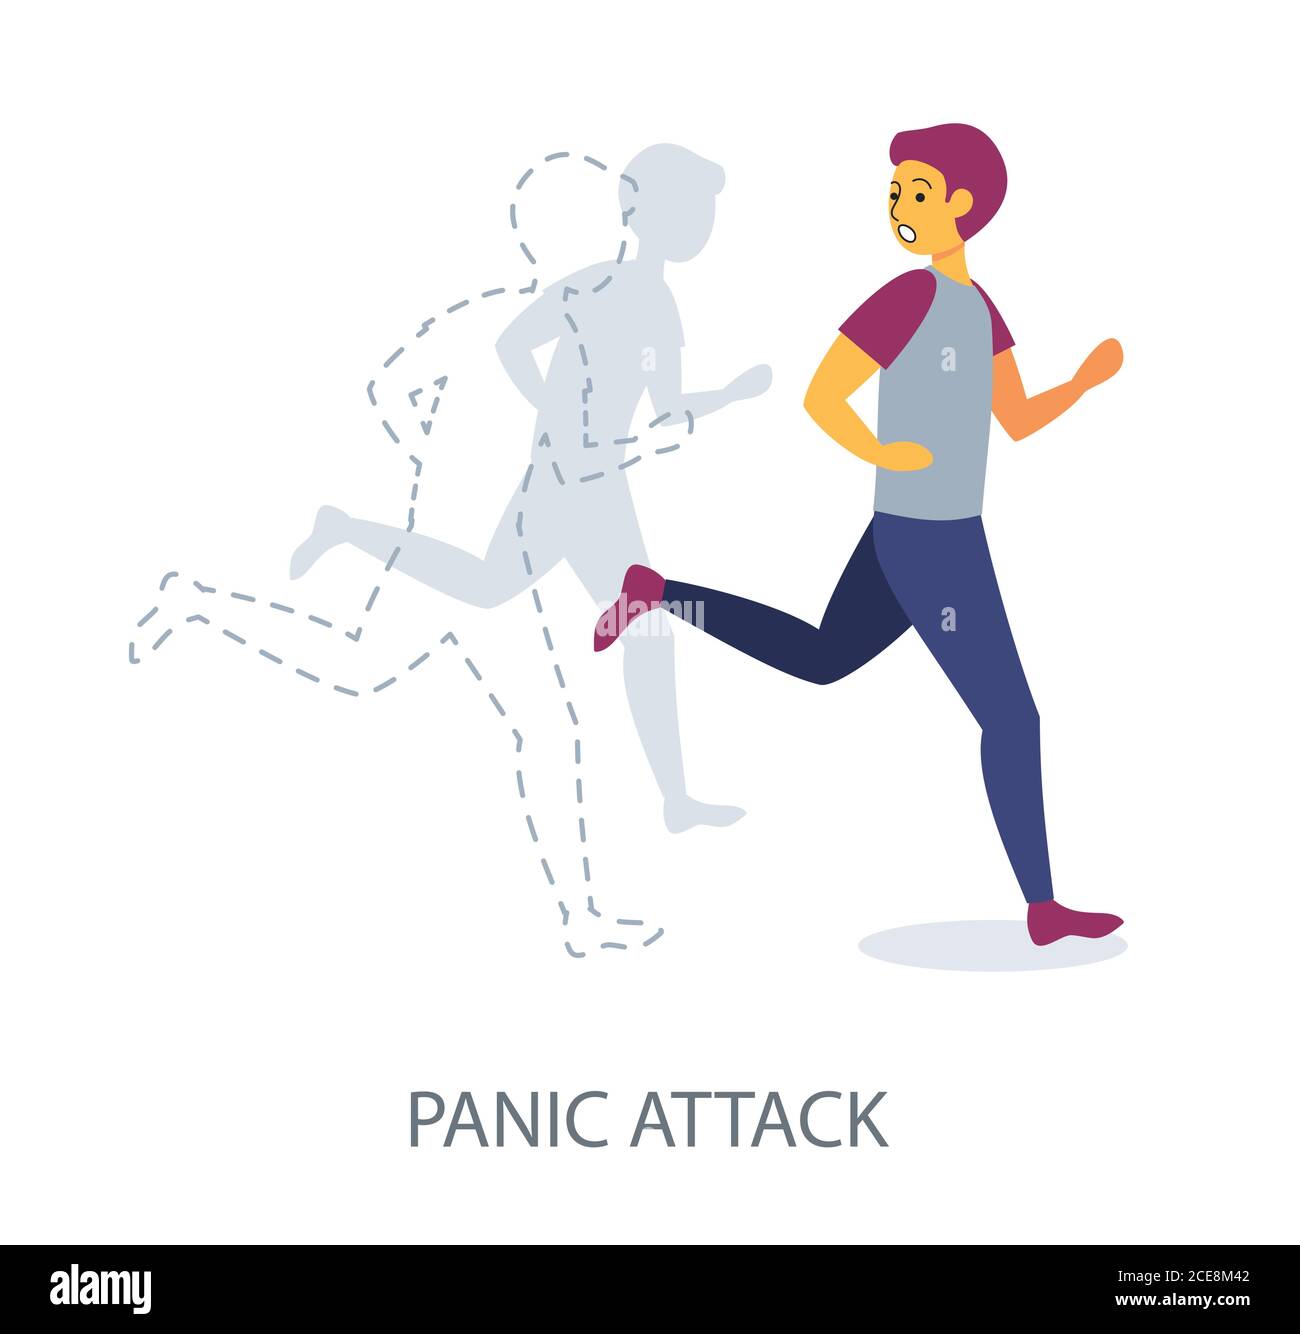 Panic Attack concept on white background, flat design vector illustration Stock Vector